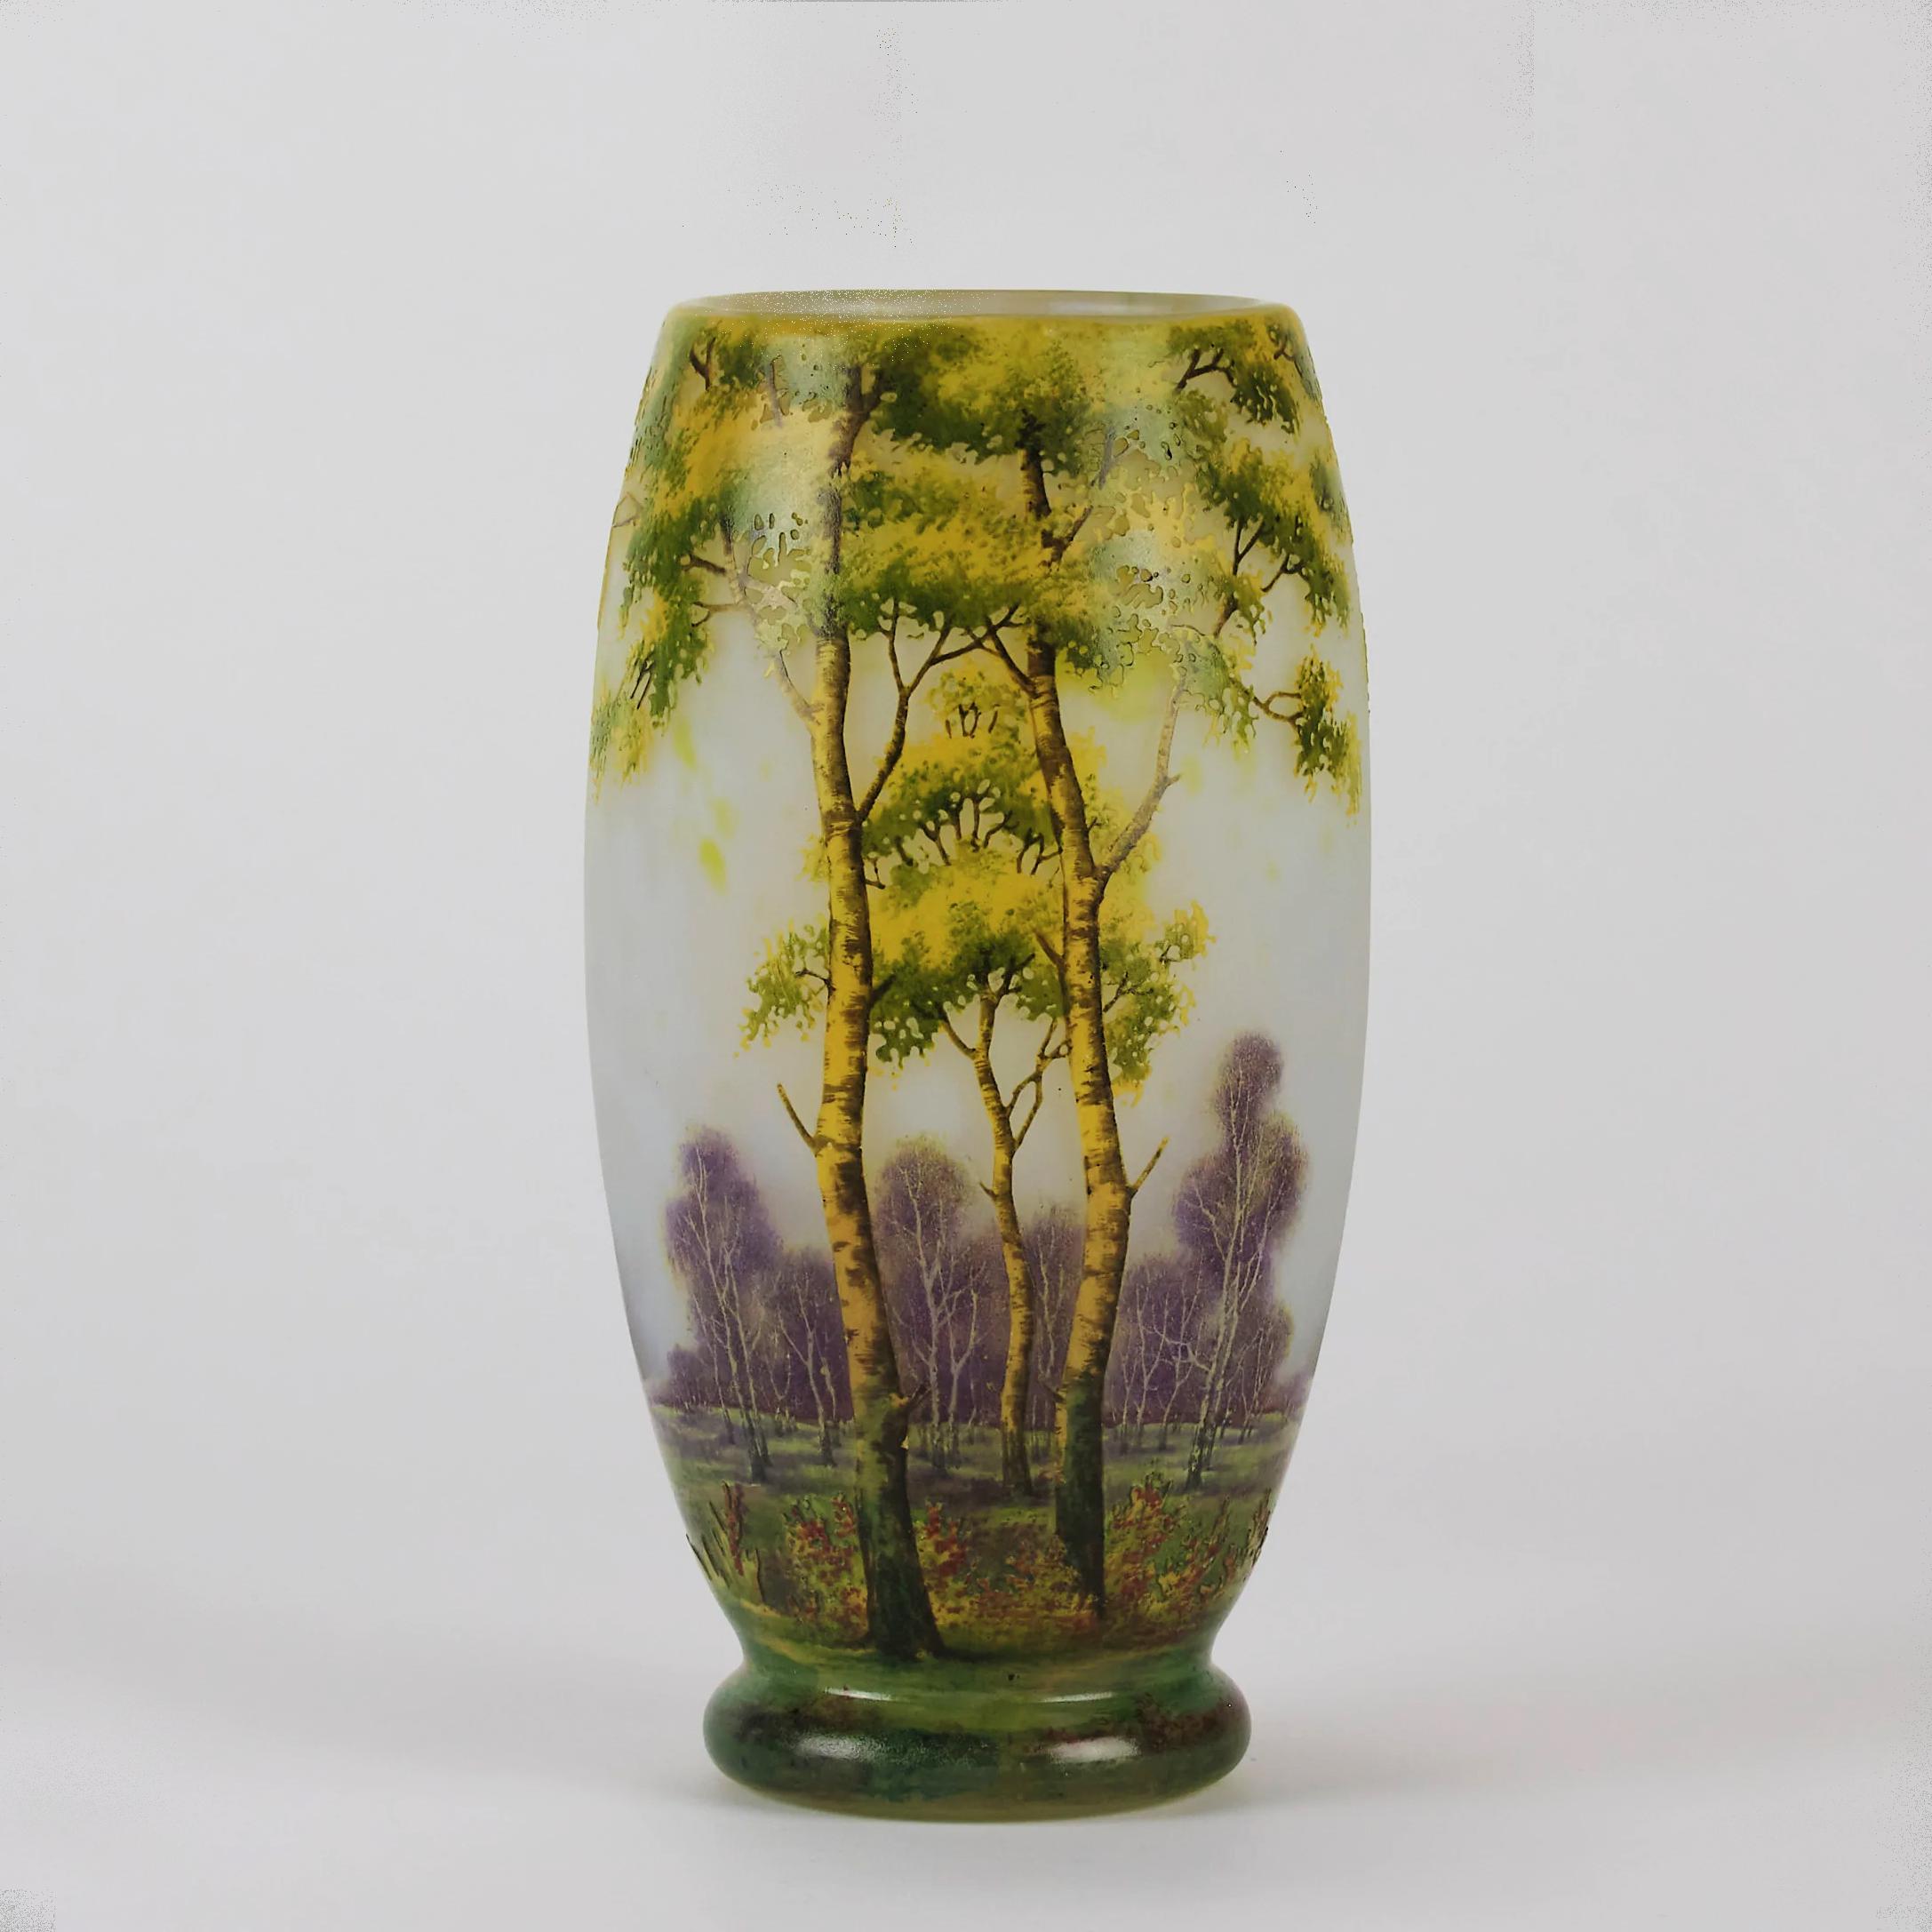 A stunning Art Nouveau cameo glass vase etched and enamelled with a deep rich summer landscape incorporating vibrant trees in a wooded landscape, exhibiting excellent colour and detail, signed Daum Nancy with Cross of Lorraine

Additional